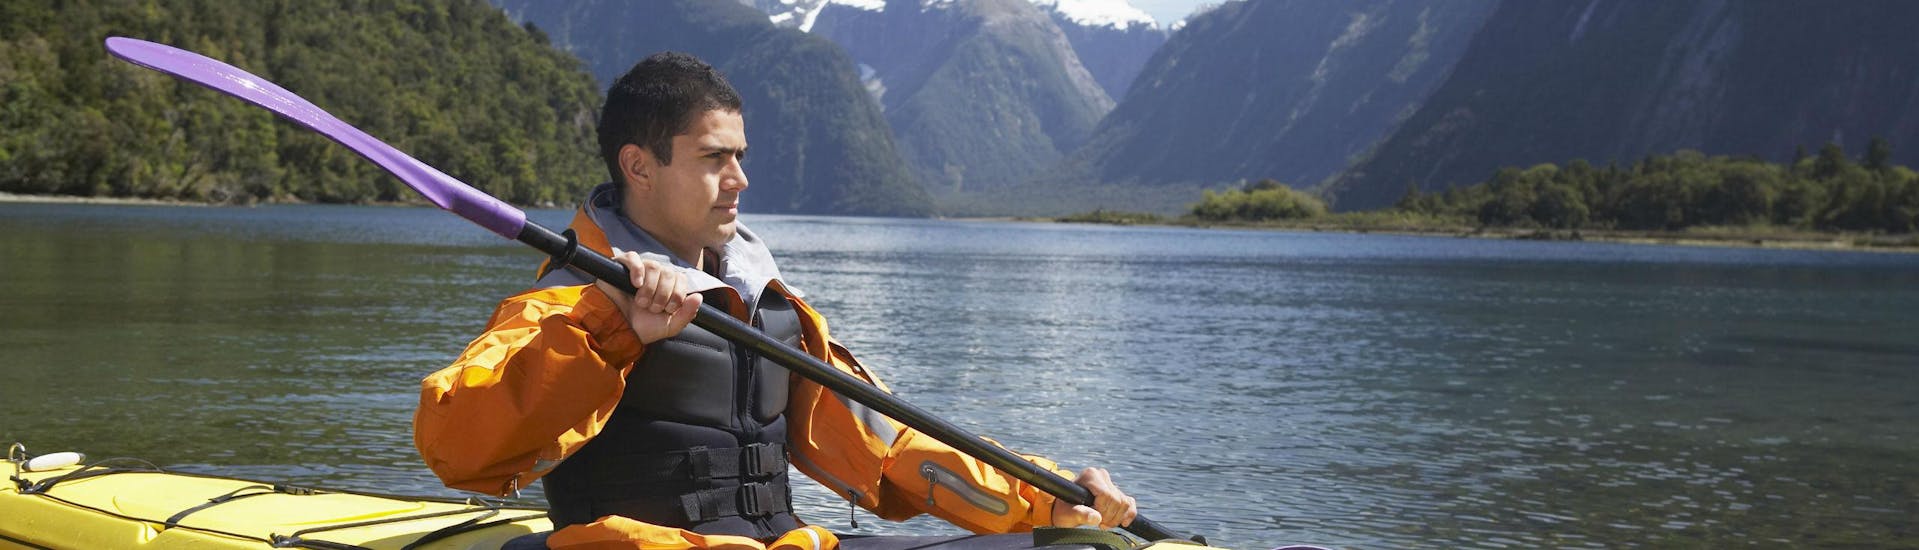 A young man is kayaking in the Milford Sound fjord and enjoying the spectacular scenery.